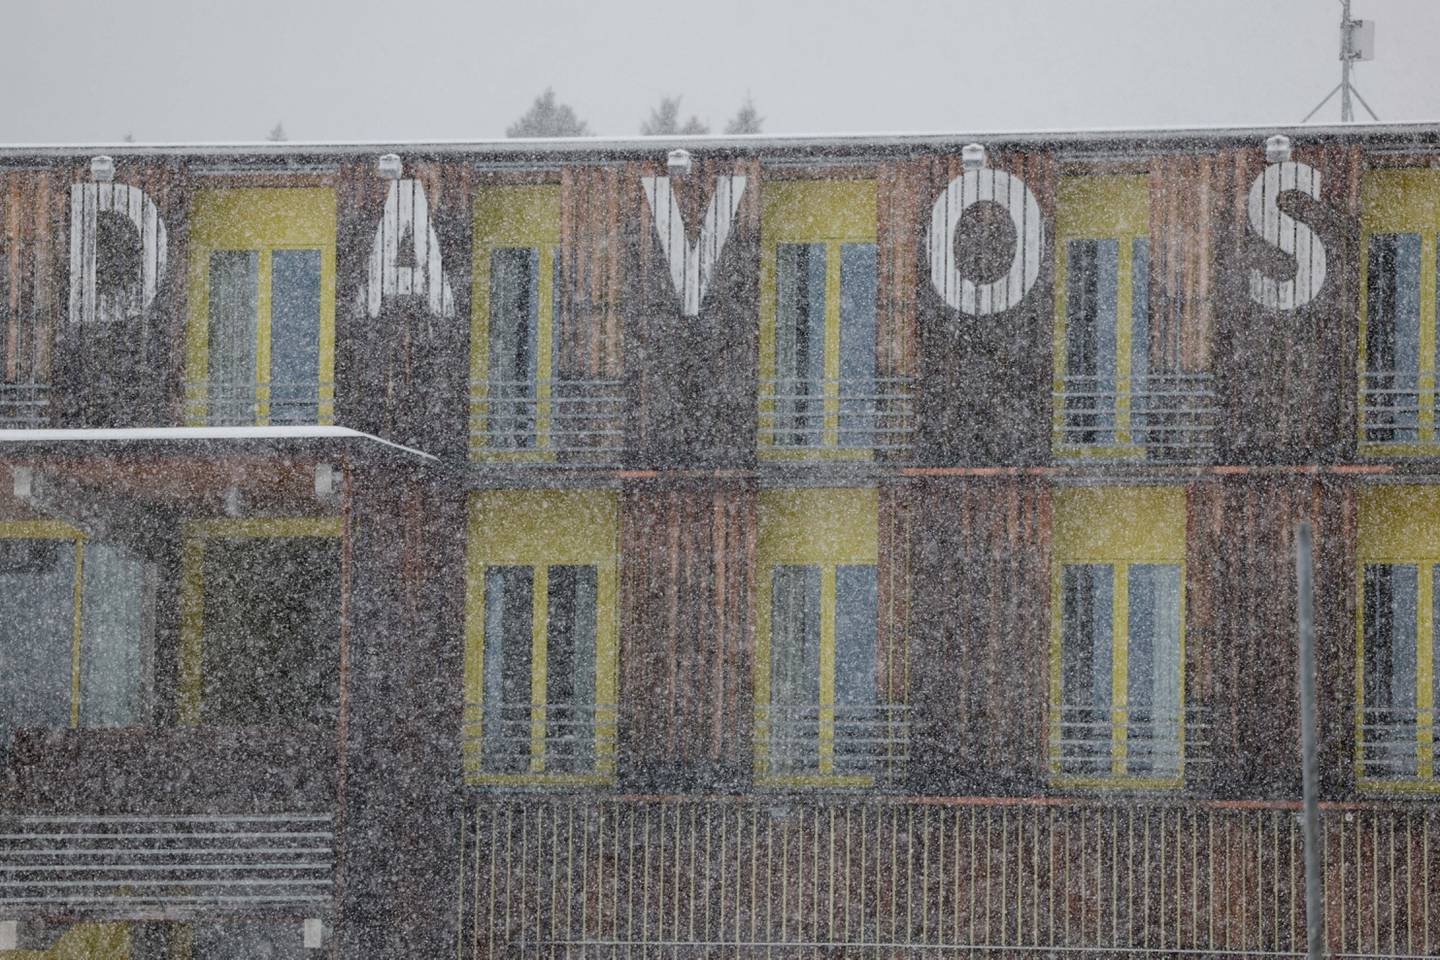 A snow storm near a hotel ahead of the World Economic Forum (WEF) in Davos, Switzerland, on Sunday, Jan. 15, 2023.